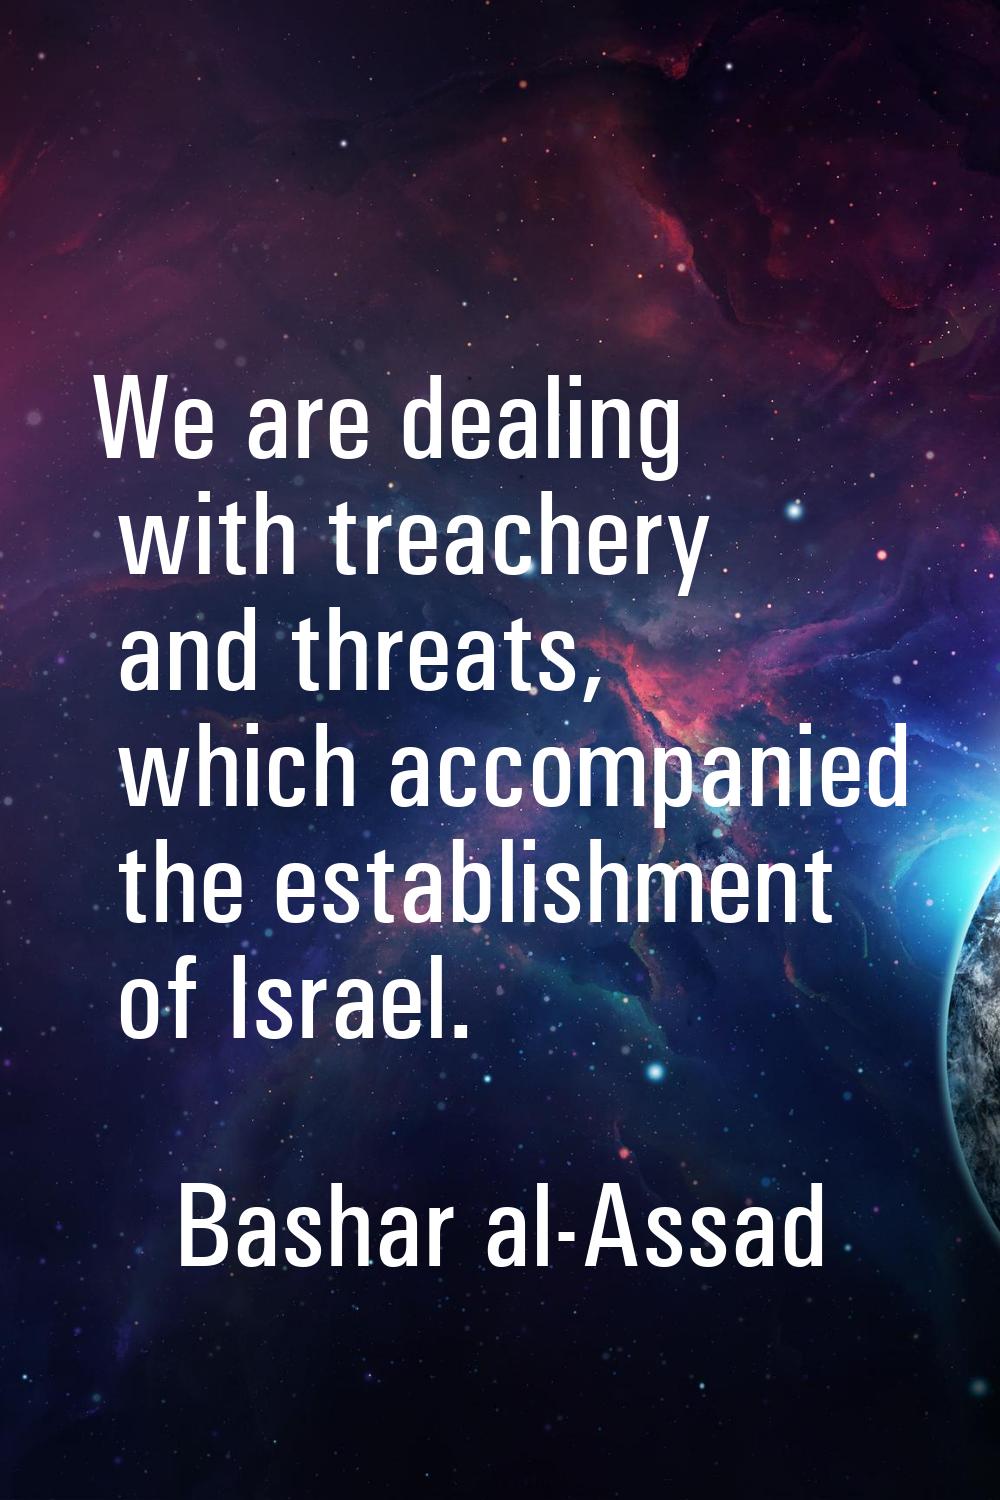 We are dealing with treachery and threats, which accompanied the establishment of Israel.